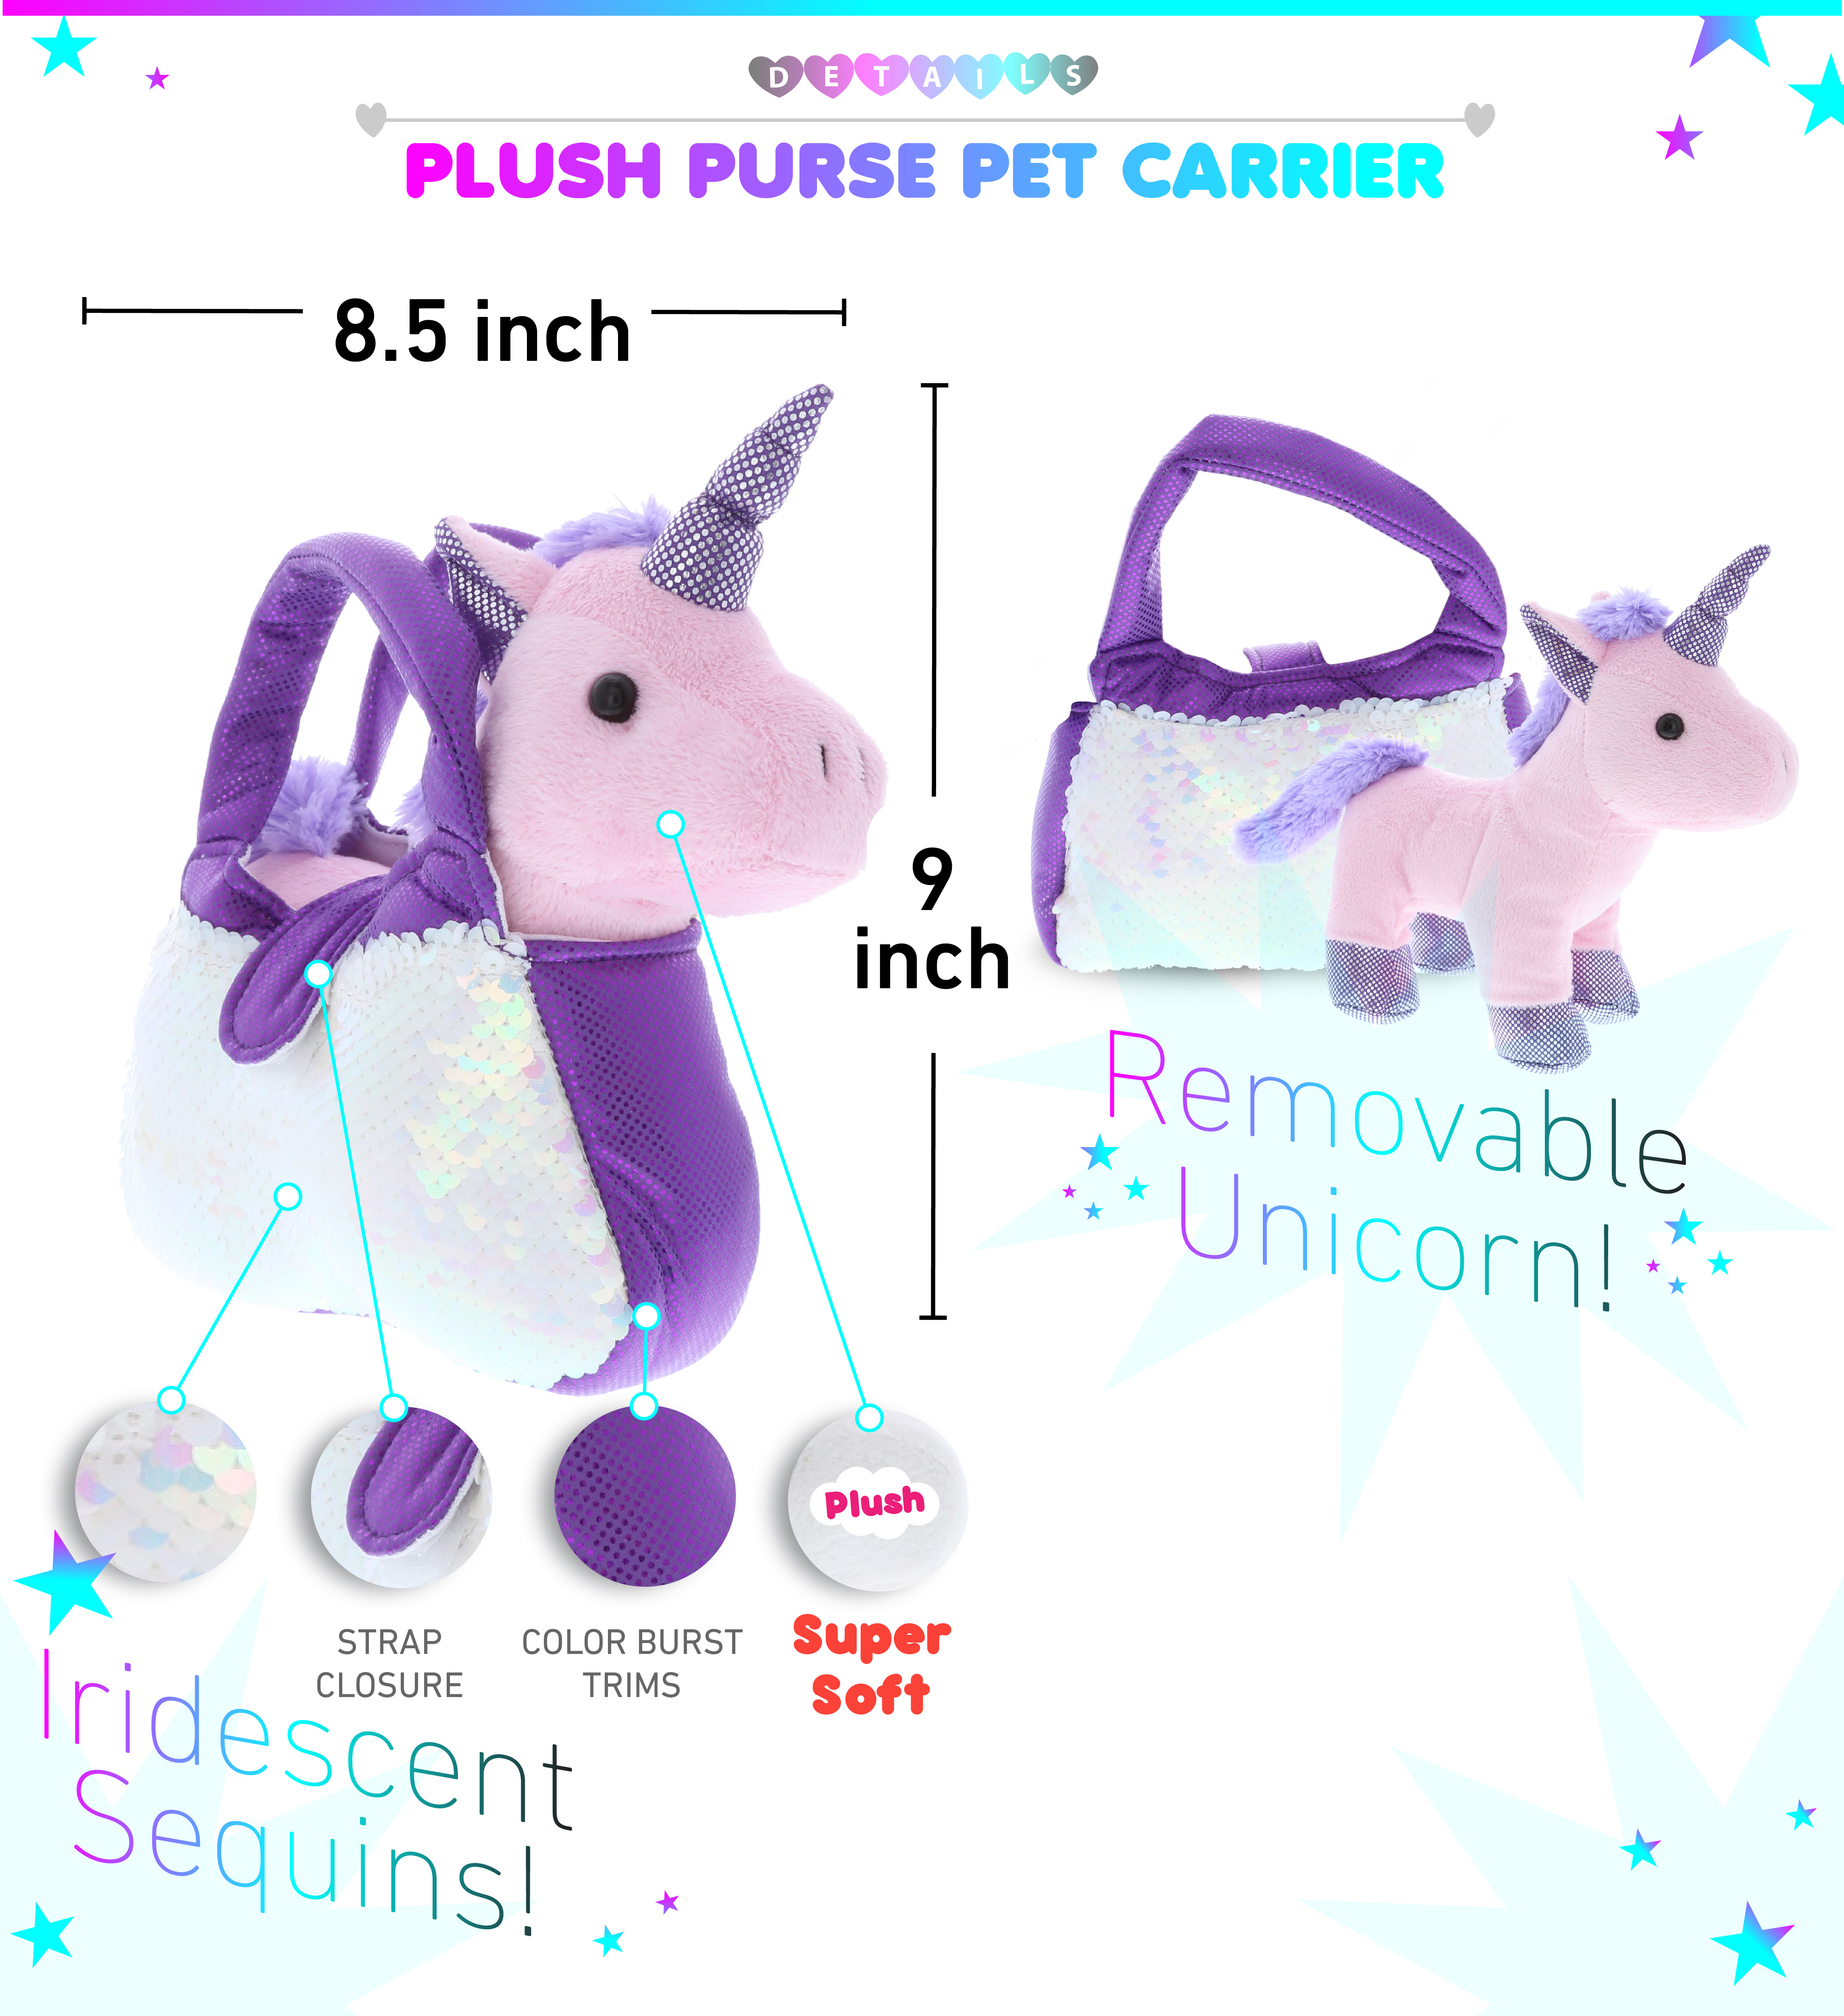 Amazon.com: DolliBu Pink Unicorn Plush Reversible Sequin Pet Carrier Handbag,  White Sparkle Soft Stuffed Animal Carrier Toy Purse for Little Girls, Cute  Toddler Girl's Pretend Play 9 Inch : Toys & Games